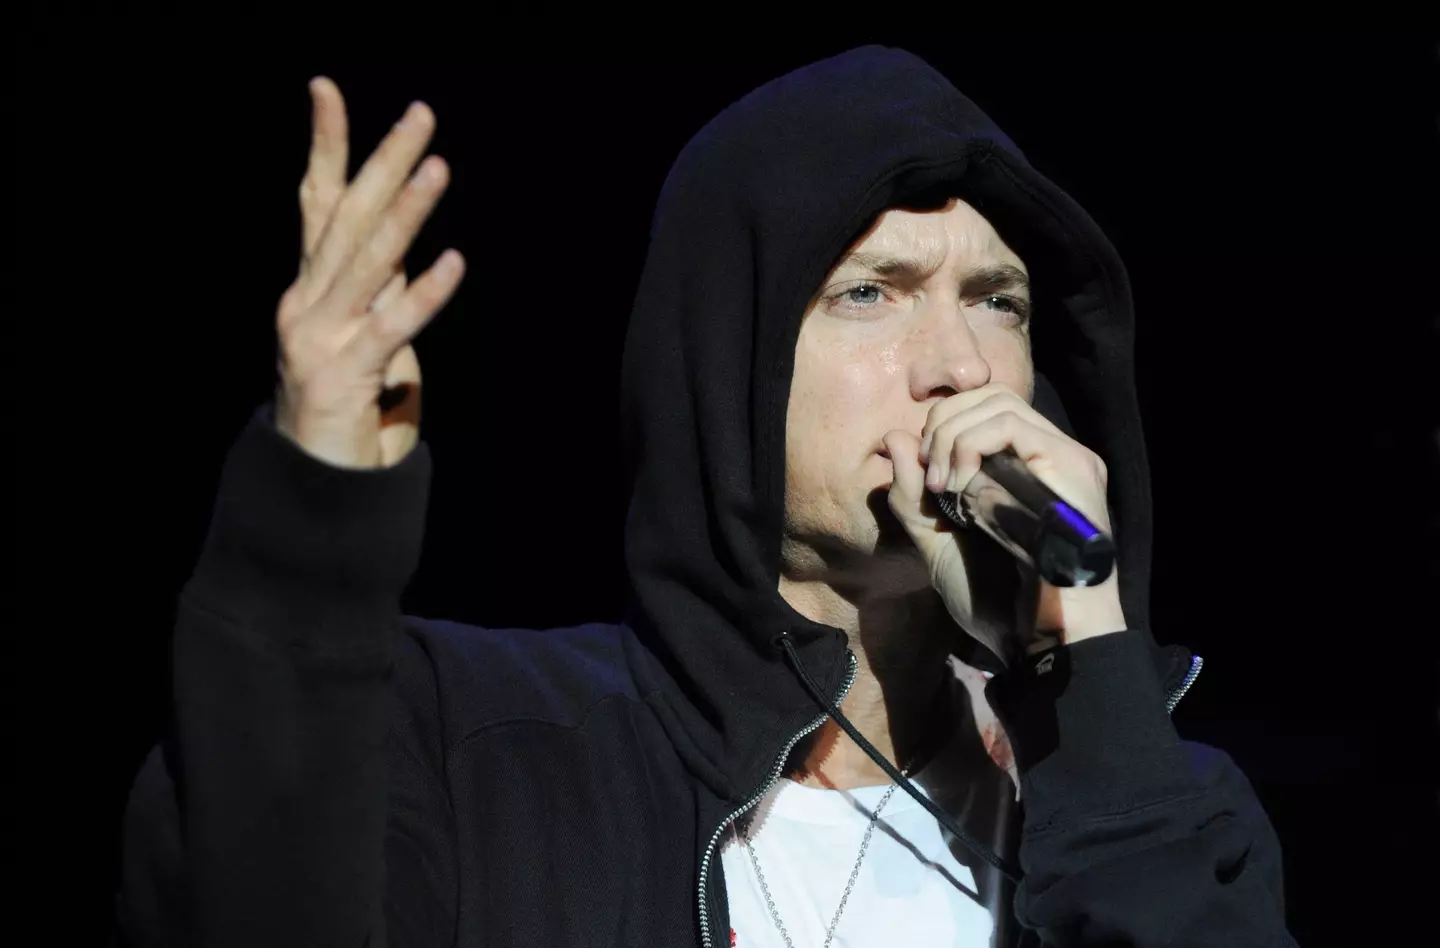 Eminem didn't hold back with 'The Warning'.